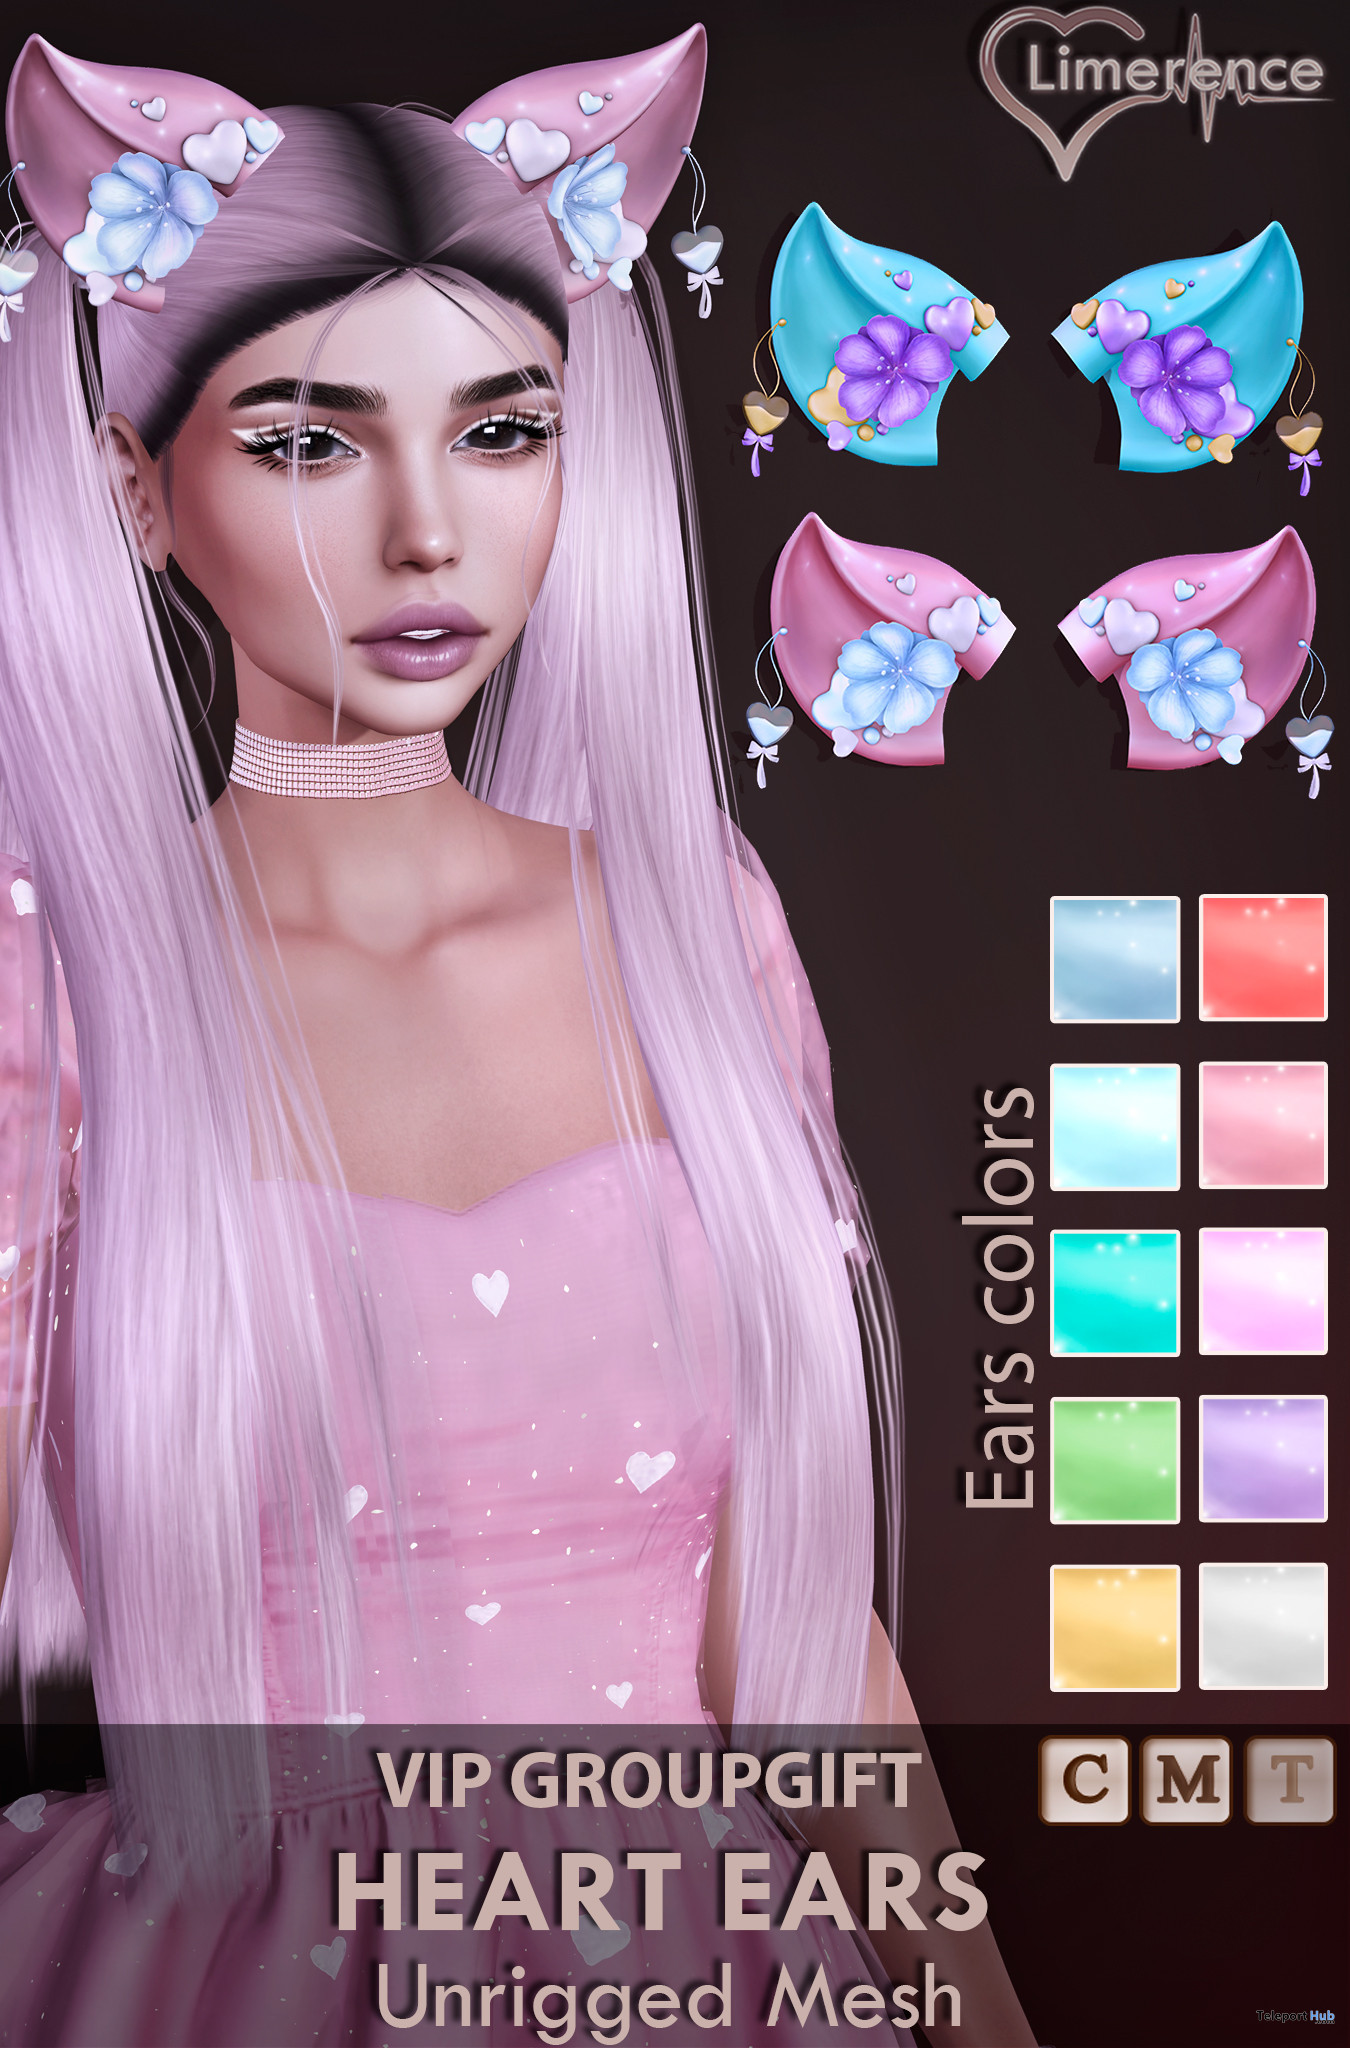 Heart Ears Fatpack February 2022 VIP Group Gift by Limerence - Teleport Hub - teleporthub.com